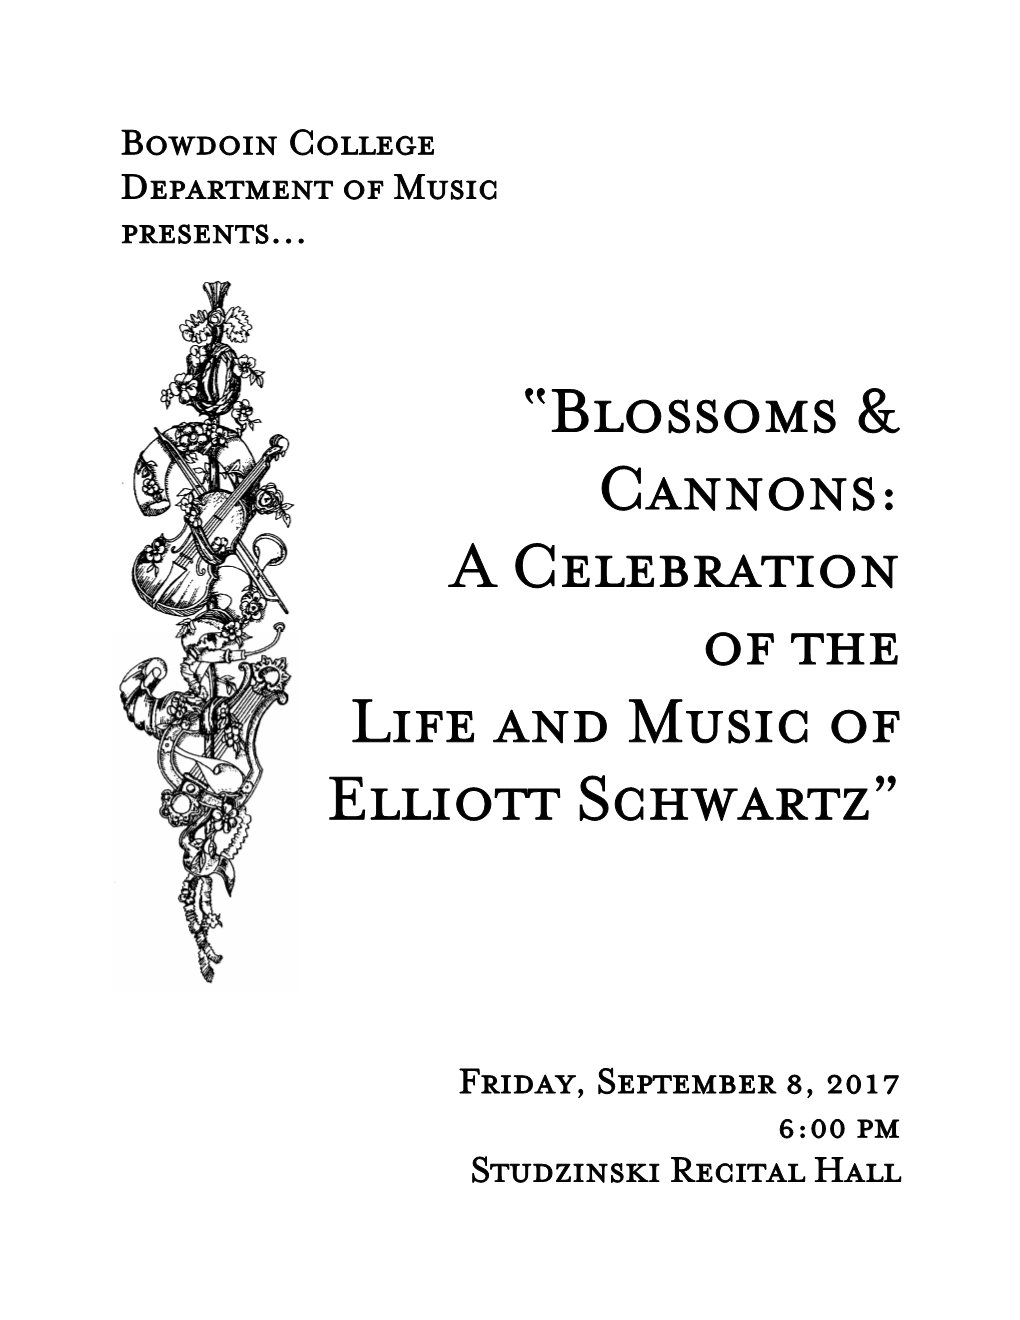 Blossoms & Cannons: a Celebration of the Life And